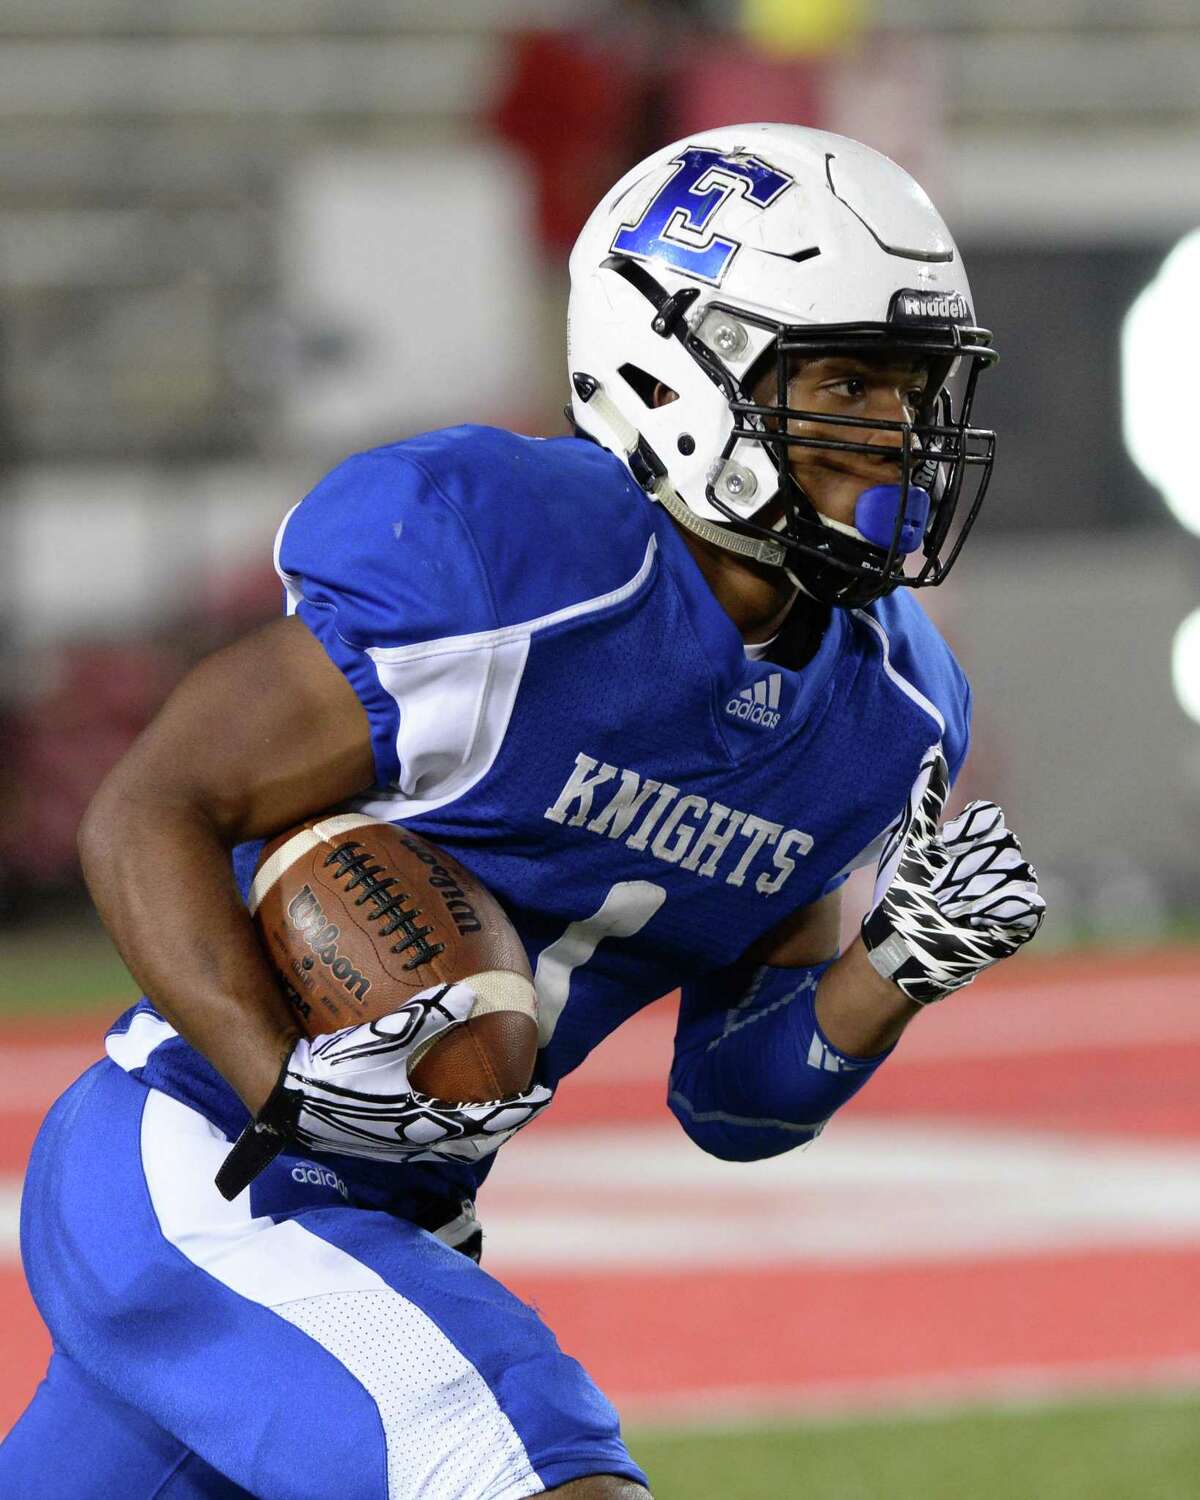 Jaylen Davis (1) of Episcopal returns a kickoff in the second quarter of SPC Football Championship game between the Kinkaid Falcons and the Episcopal Knights on November 11, 2017 at TDECU Stadium, Houston, TX.